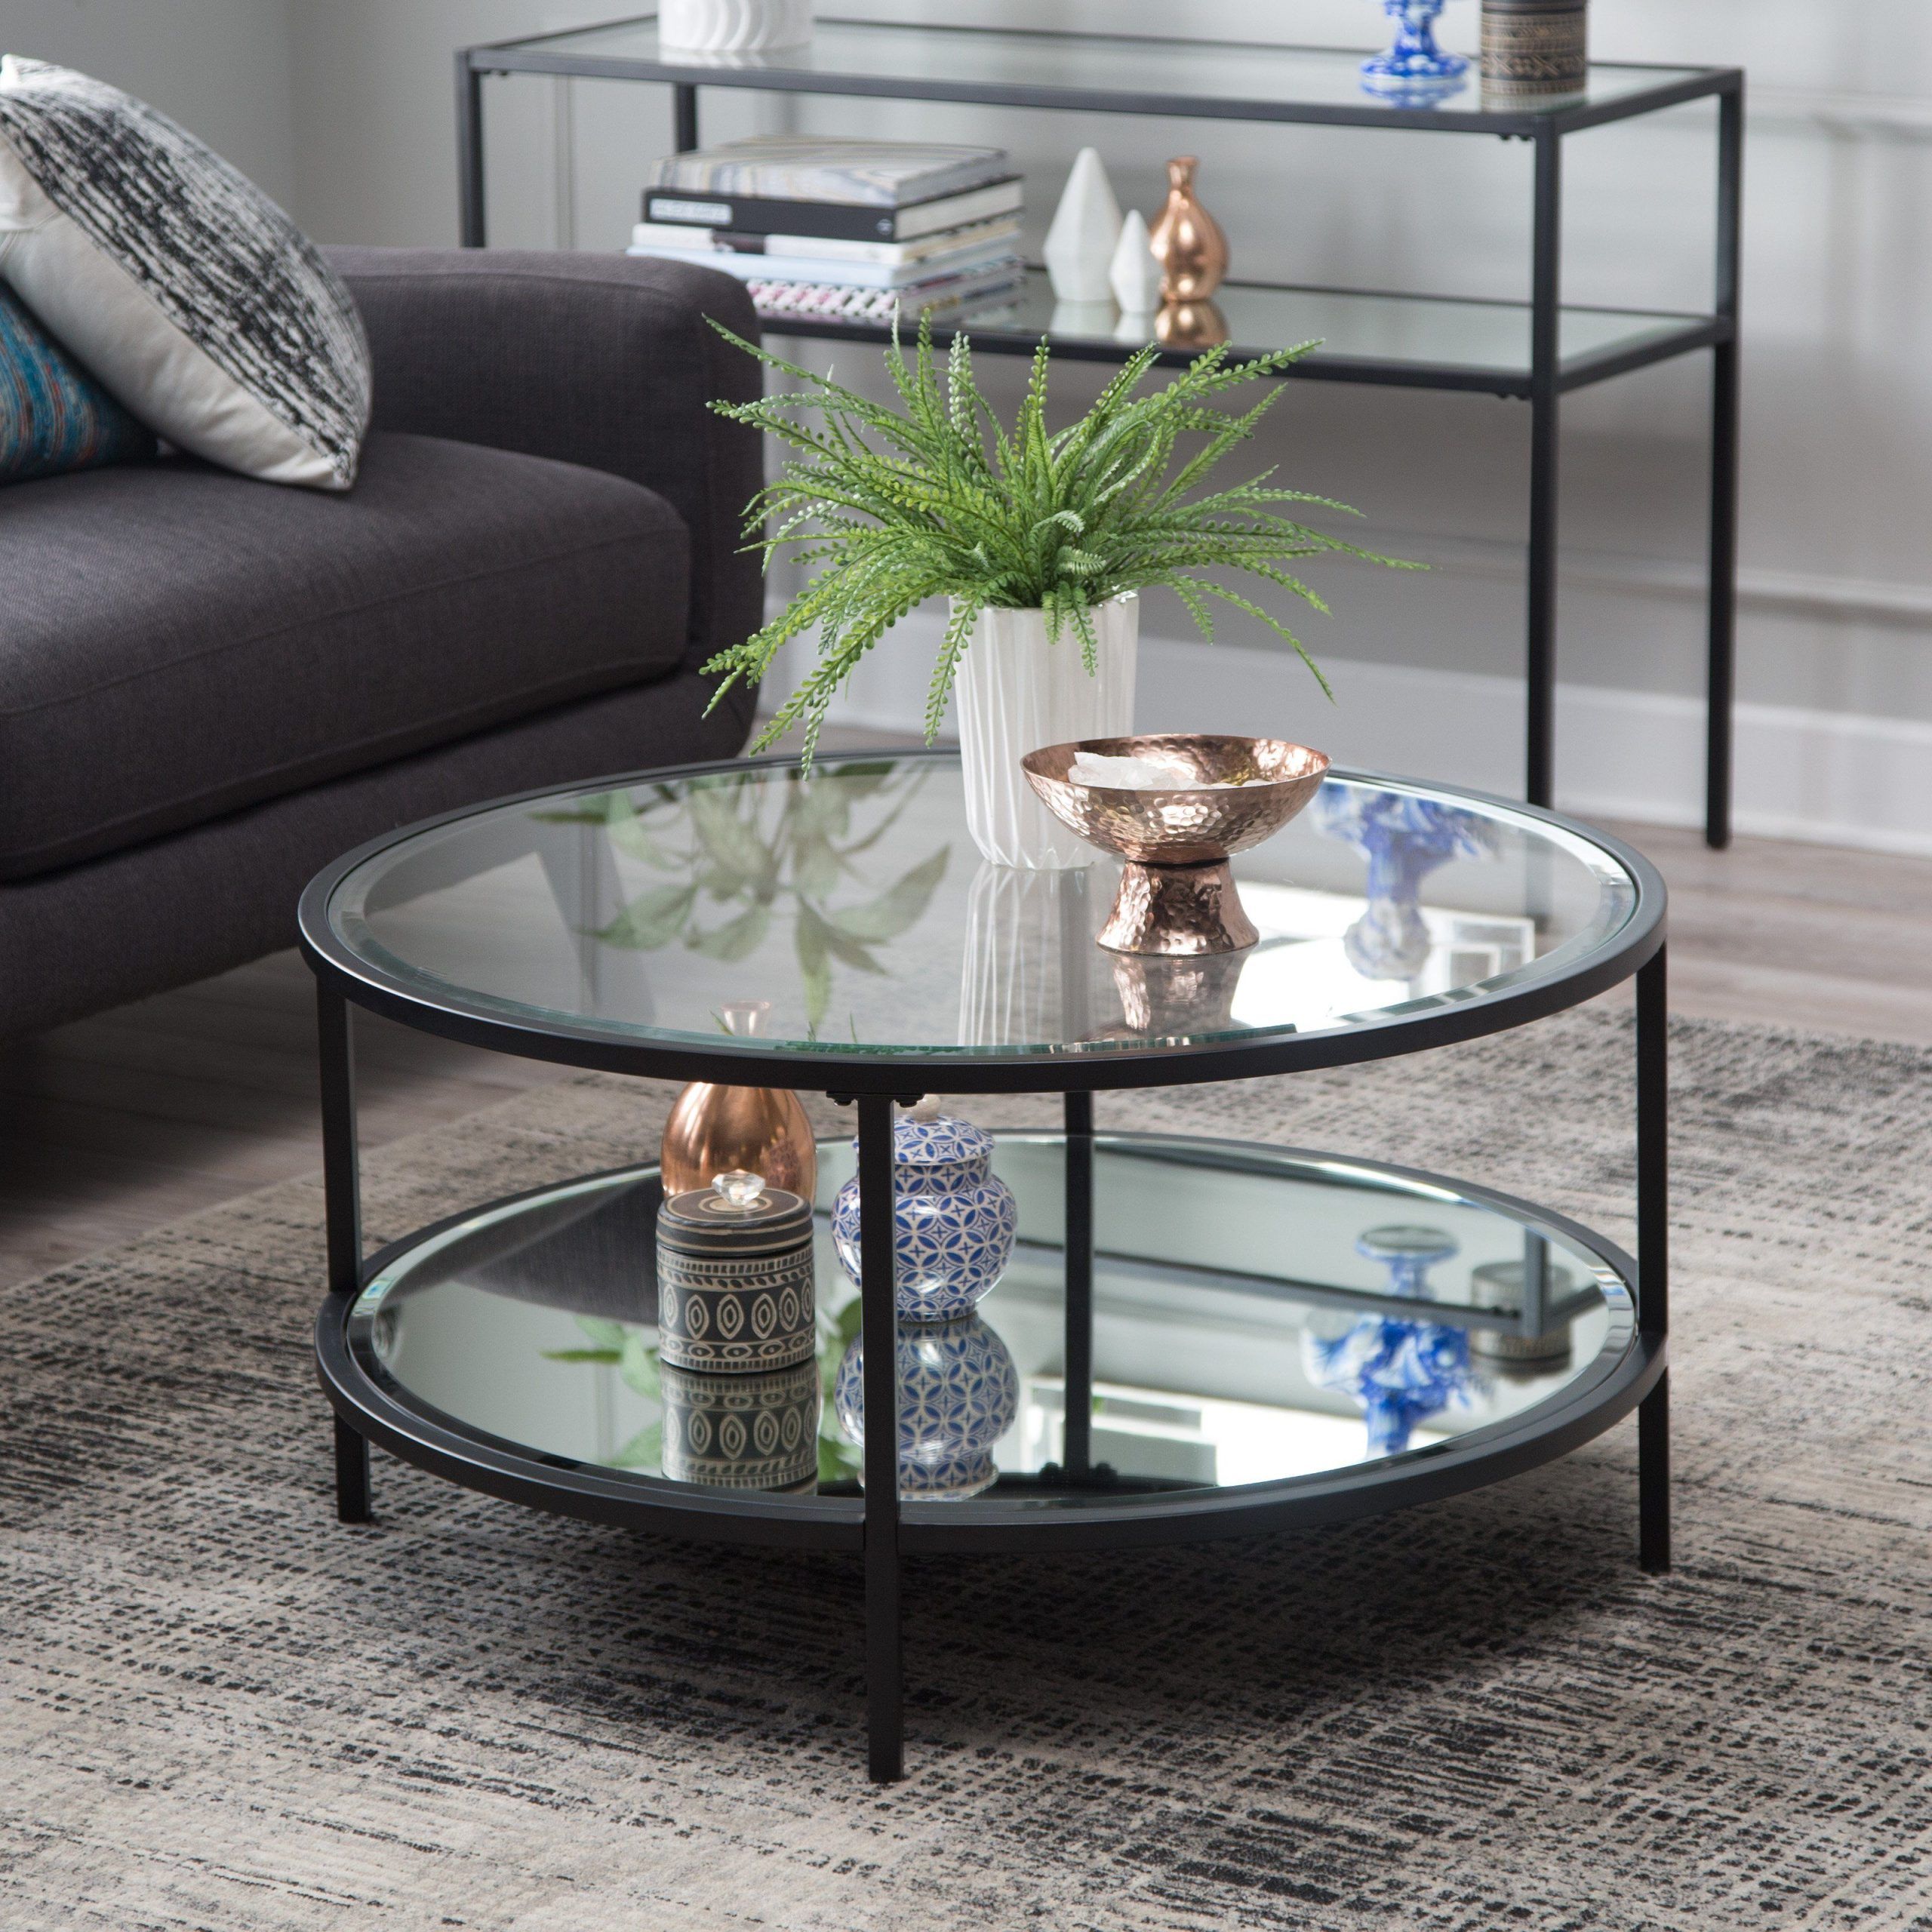 Belham Living Lamont Round Coffee Table – Black | From Hayneedle Pertaining To Full Black Round Coffee Tables (View 7 of 15)